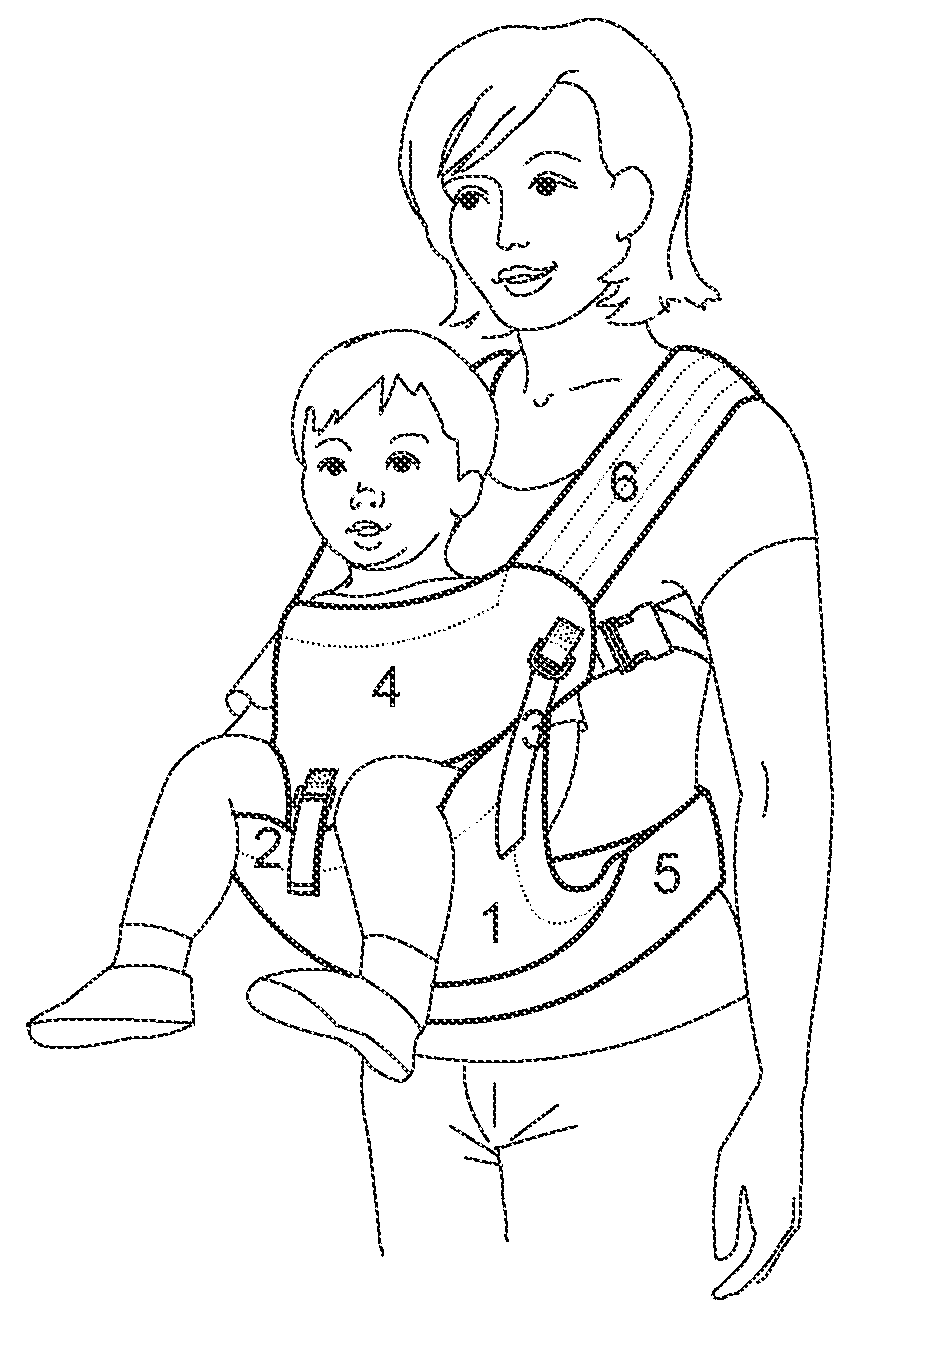 Apparatus for a baby carrier